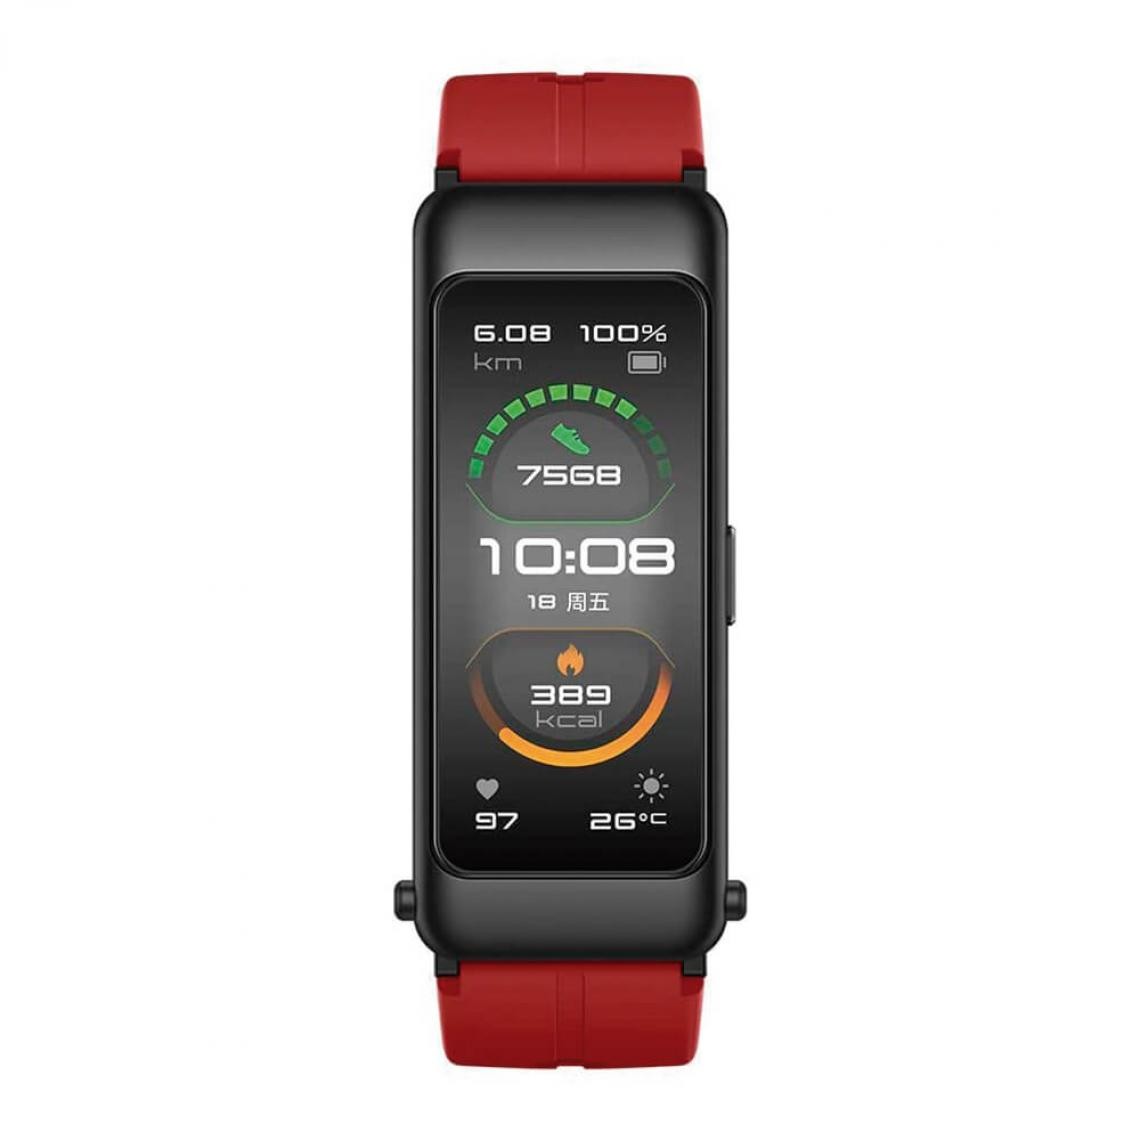 Huawei - Huawei Talkband B6 Sport Rouge (Coral Red) FDS-B19 - Bracelet connecté